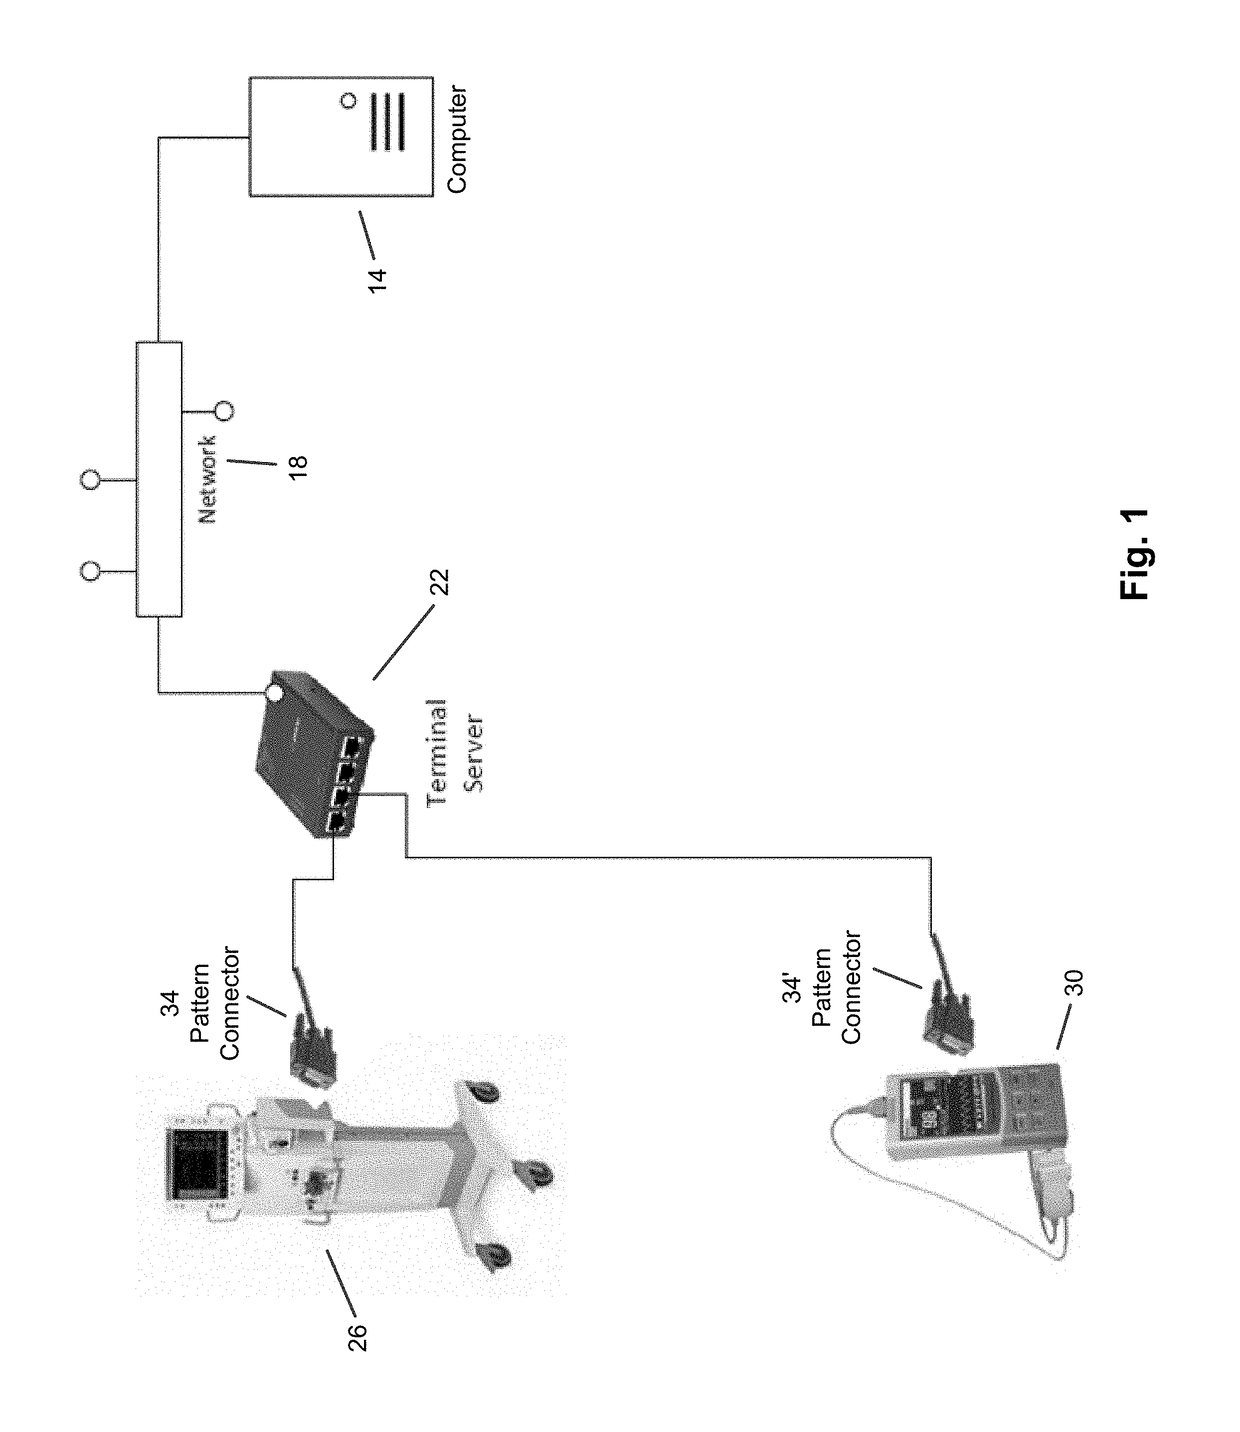 Method and Apparatus for Device Identification Using a Serial Port